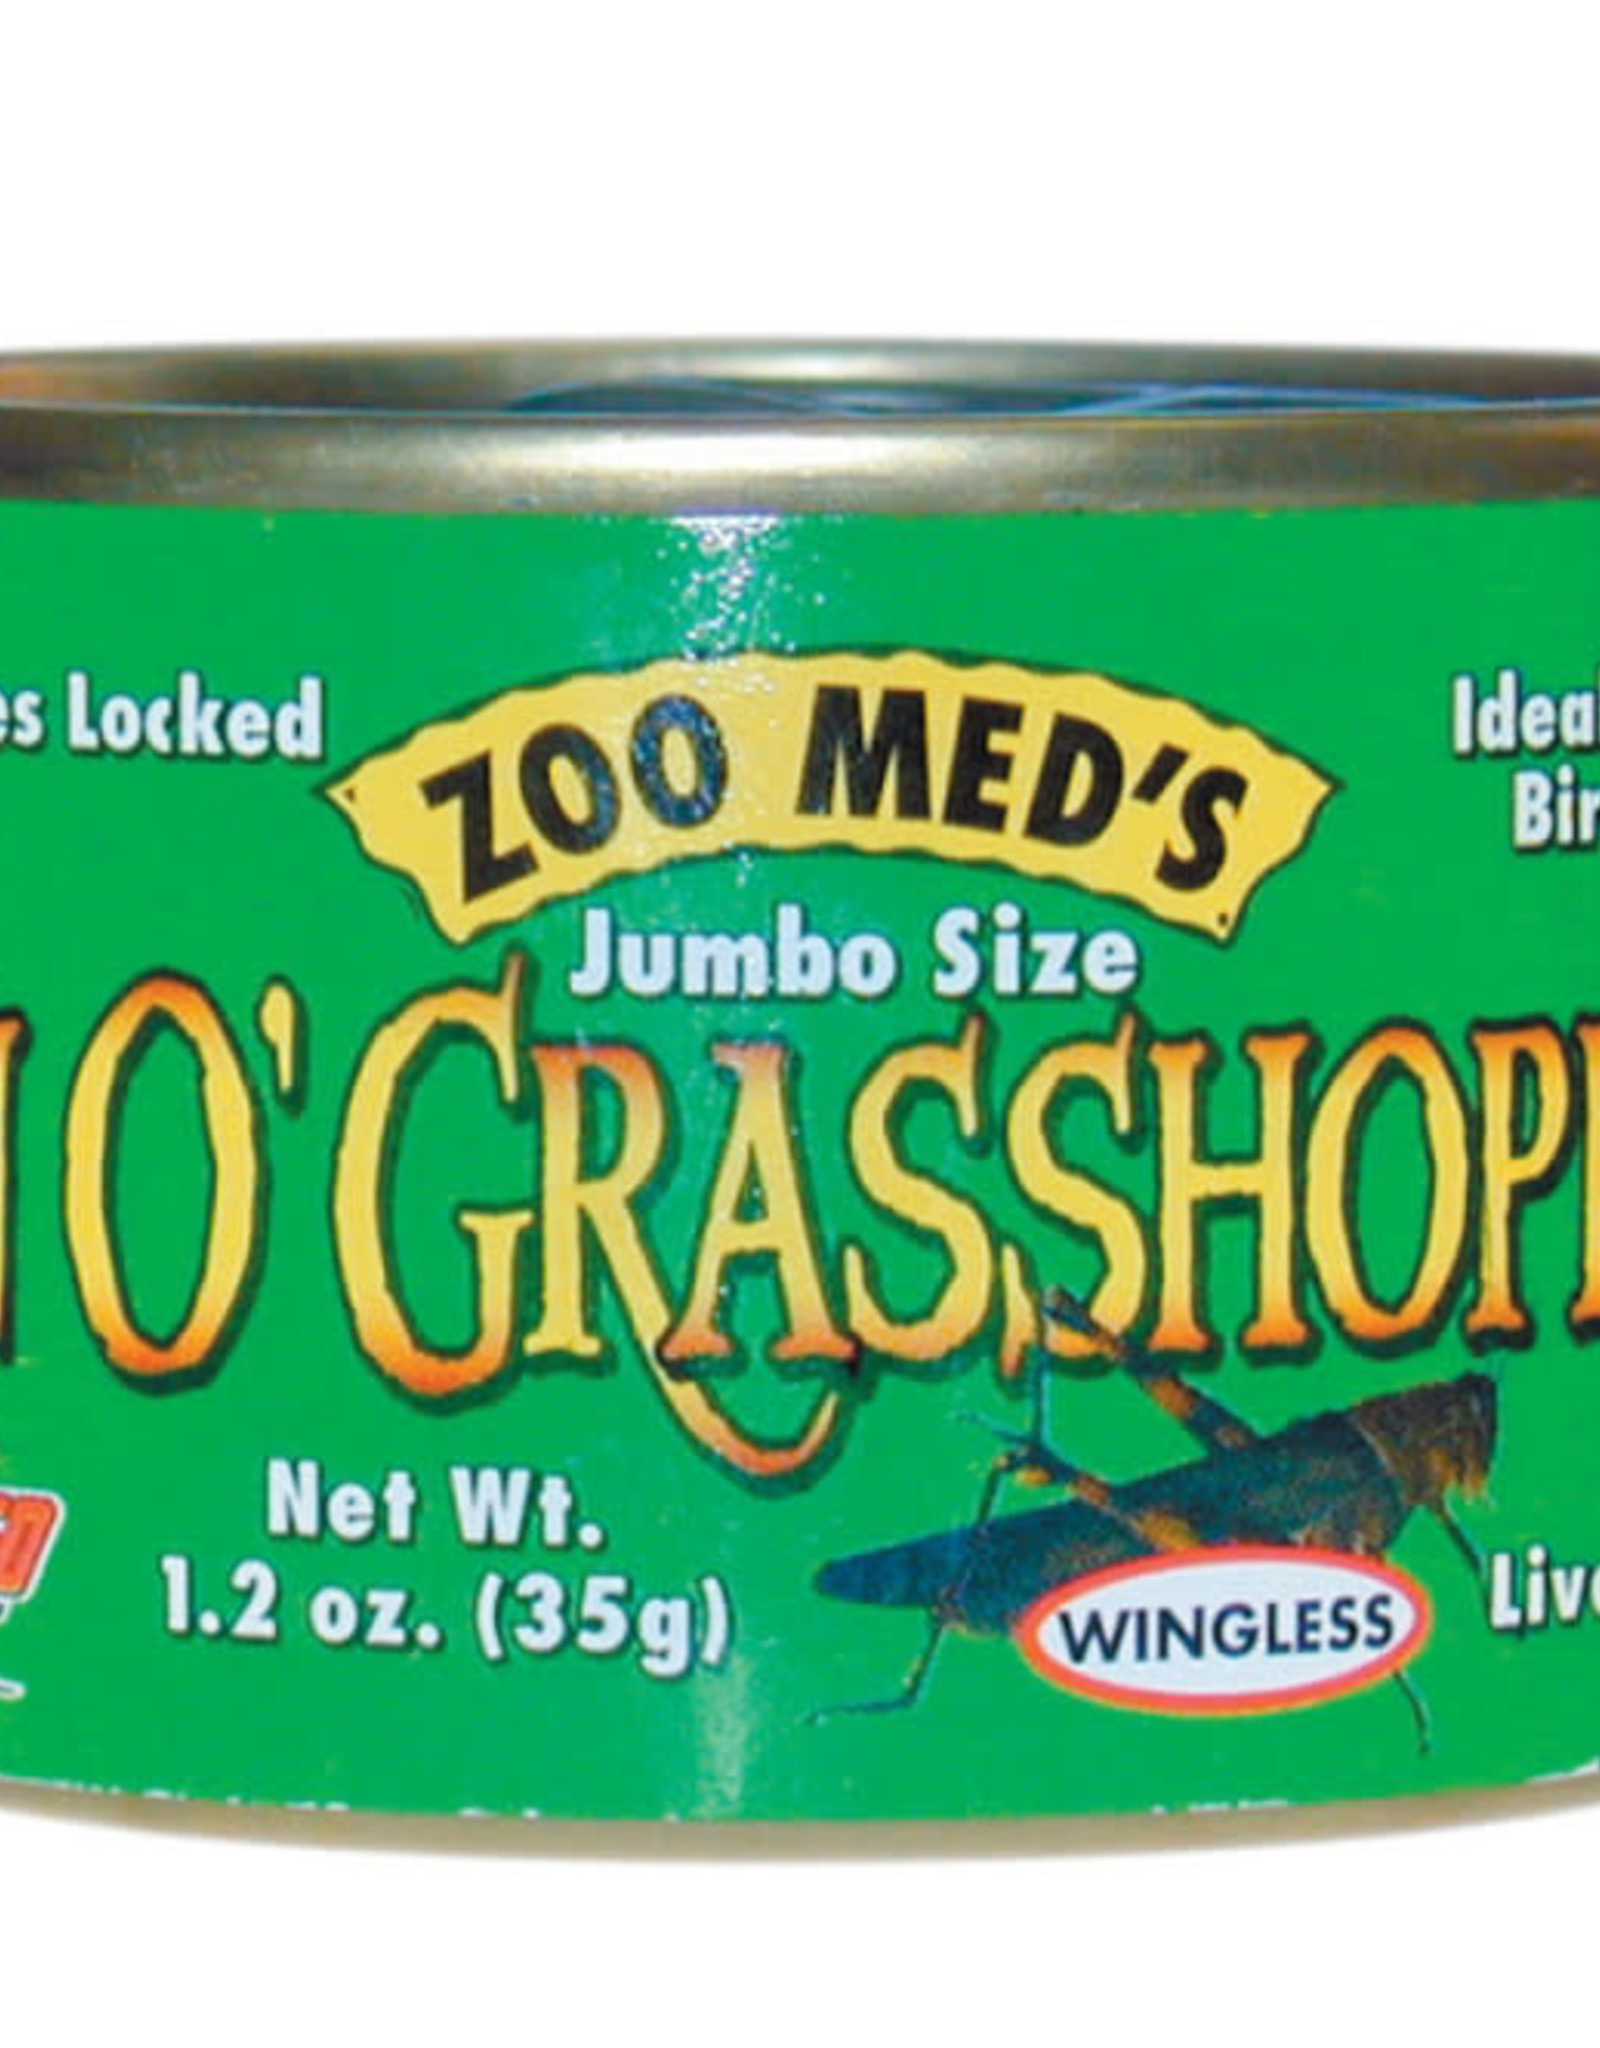 ZOO MED LABORATORIES, INC. ZOO MED ZM-44- CANNED FOOD- CAN O' GRASSHOPPERS- 1.2 OZ